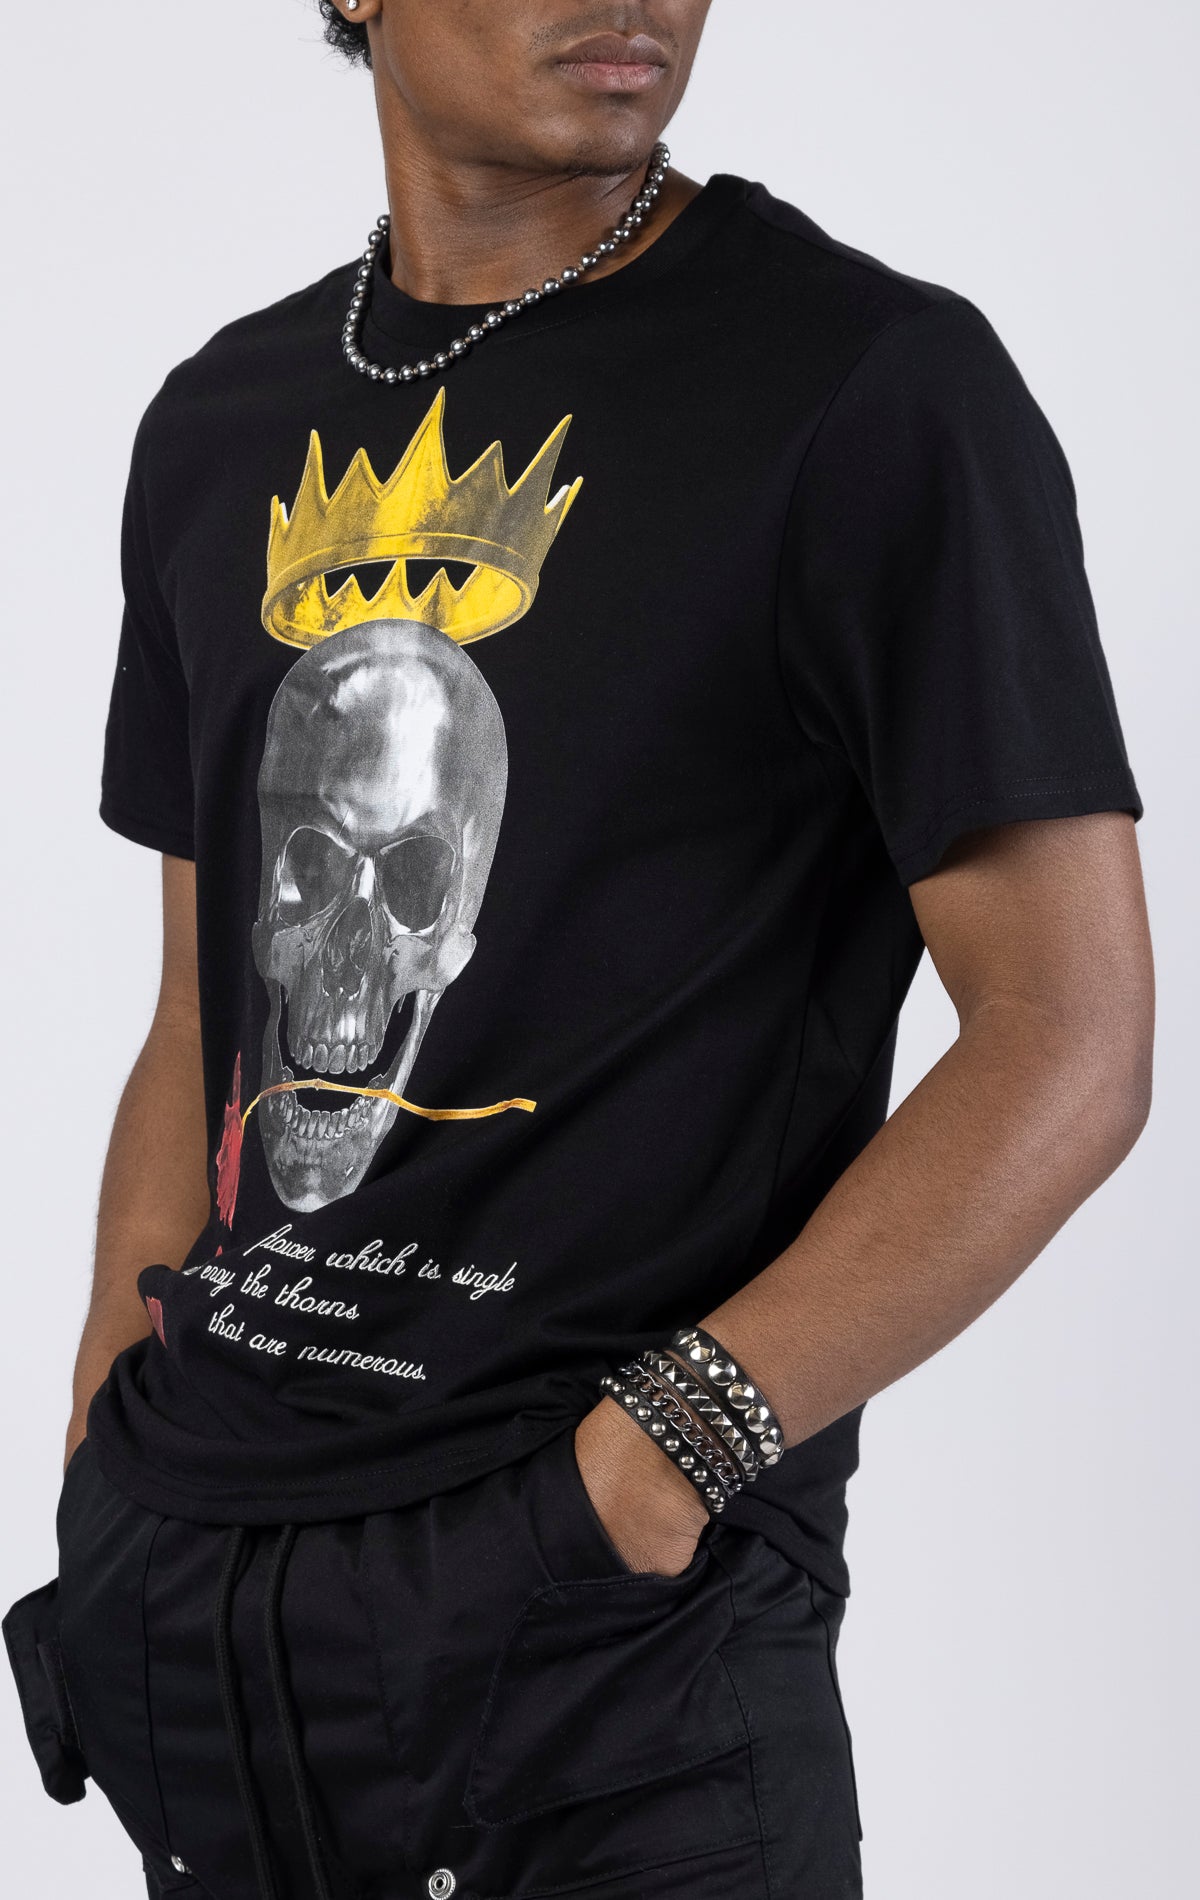 Graphic crewneck t-shirt in black featuring a skull king design on the front. The shirt is made from a blend of 65% polyester and 35% cotton.